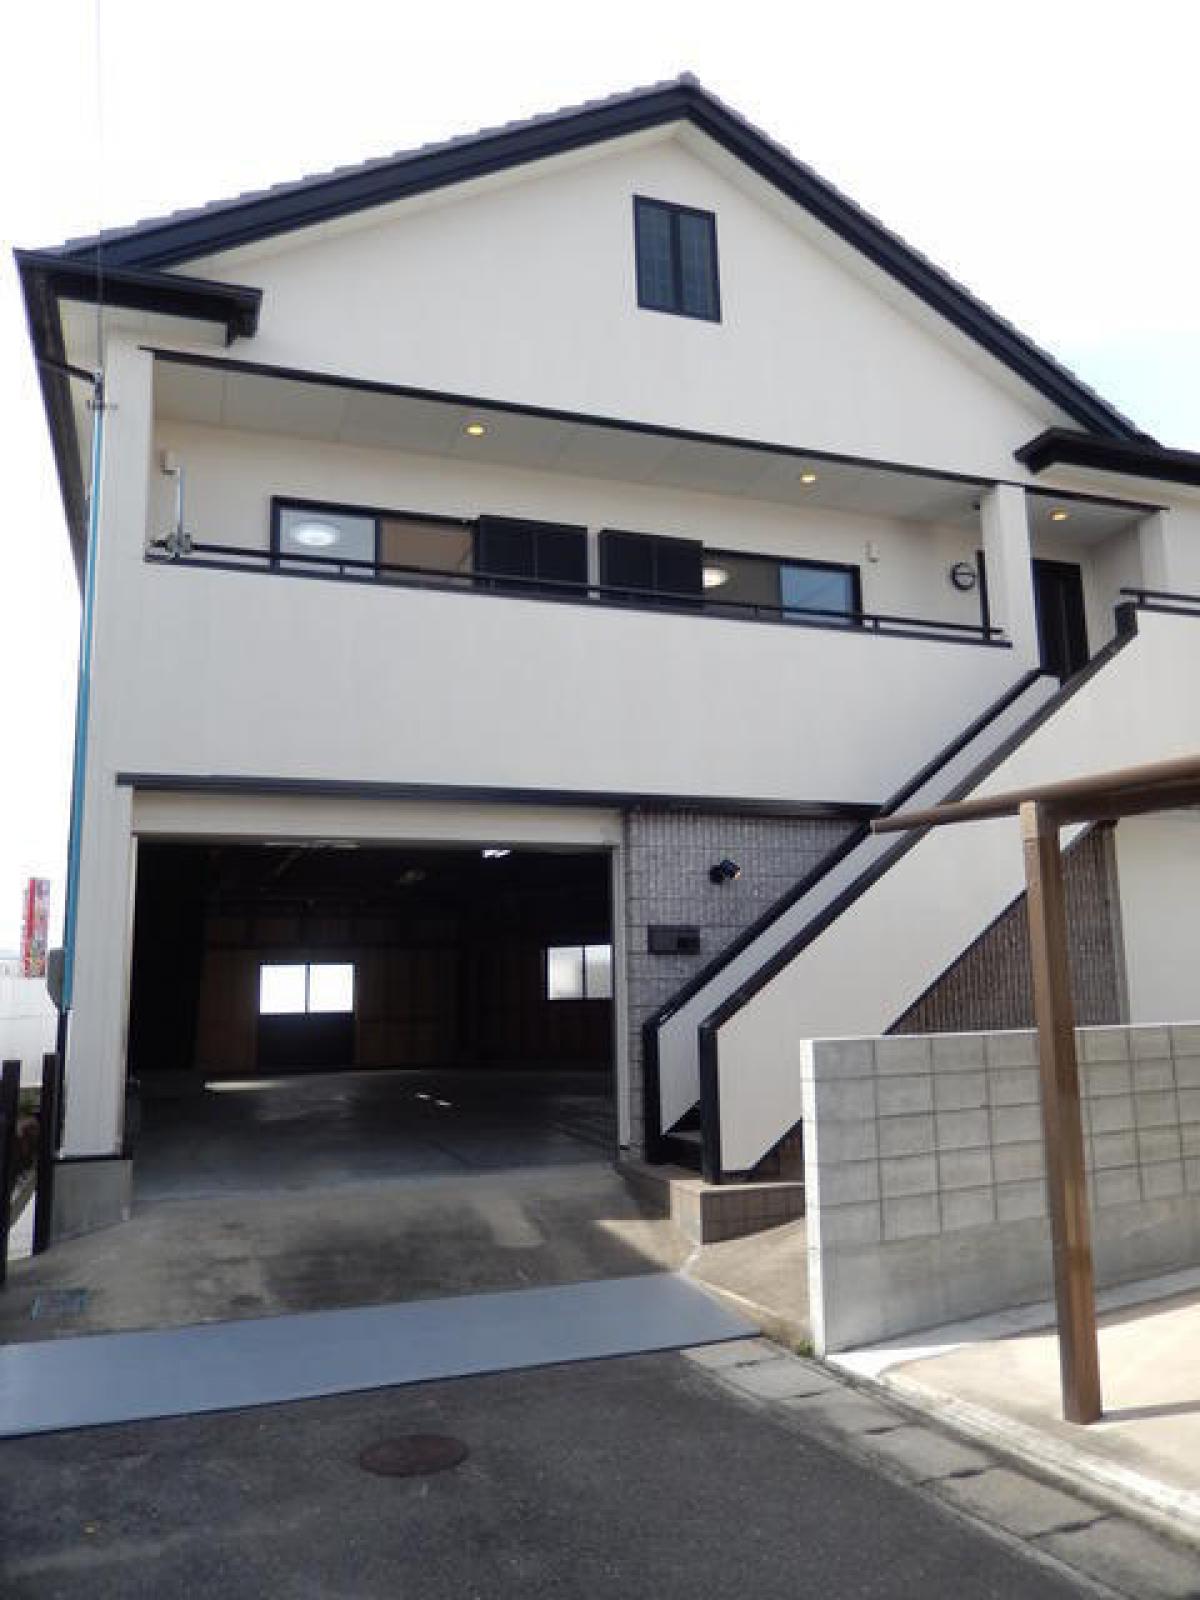 Picture of Home For Sale in Itano Gun Aizumi Cho, Tokushima, Japan